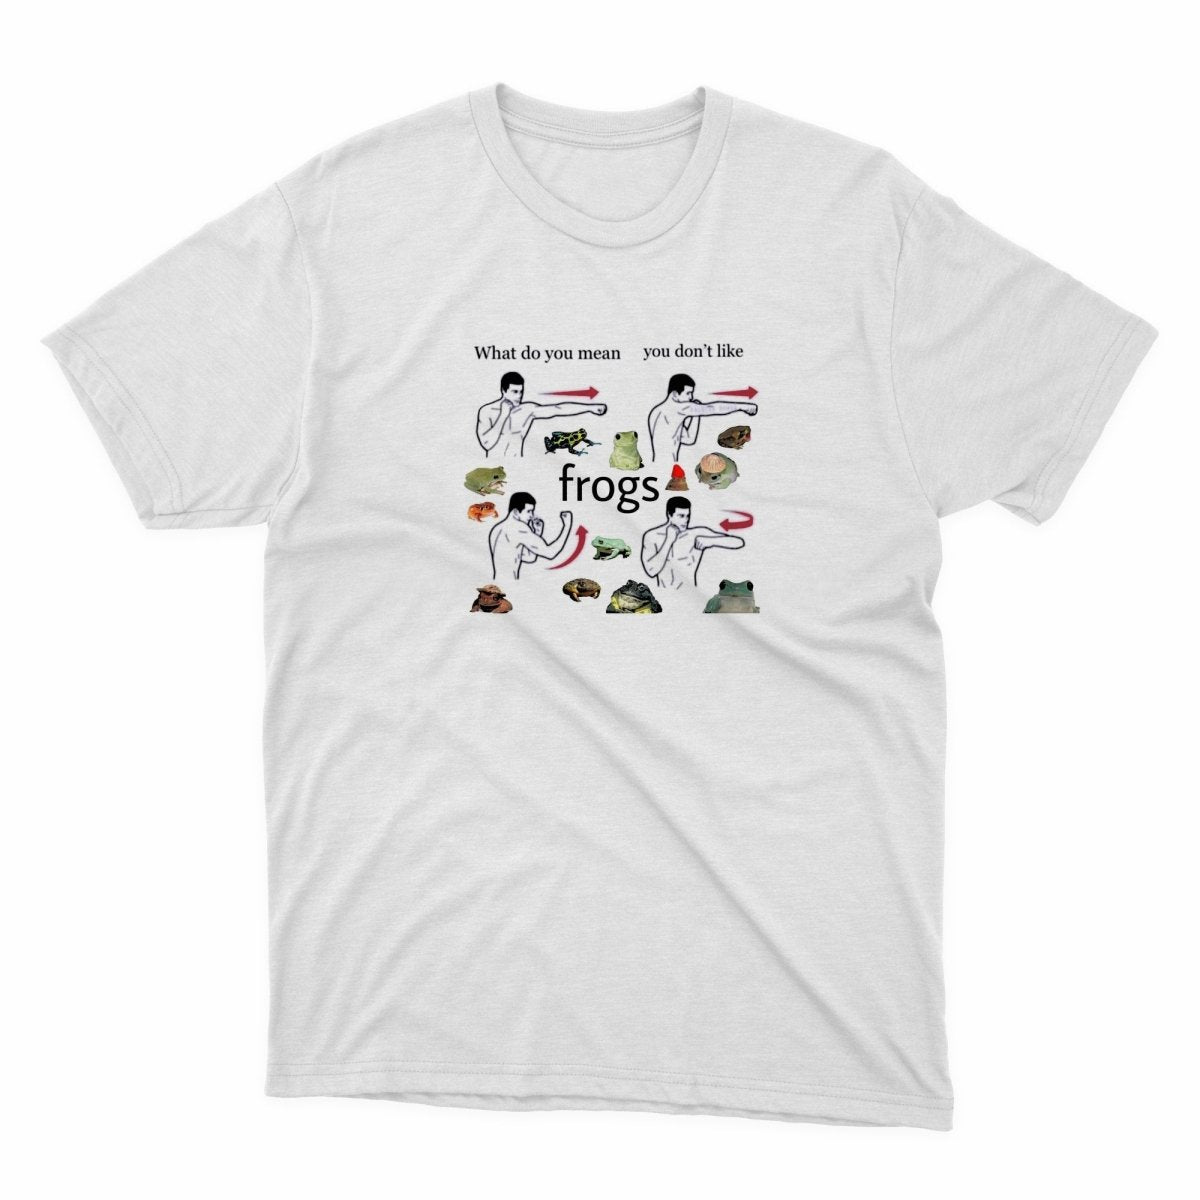 You Dont Like Frogs Meme Shirt - stickerbullYou Dont Like Frogs Meme ShirtShirtsPrintifystickerbull23750056287309180797WhiteSa white t - shirt with the words frog on it